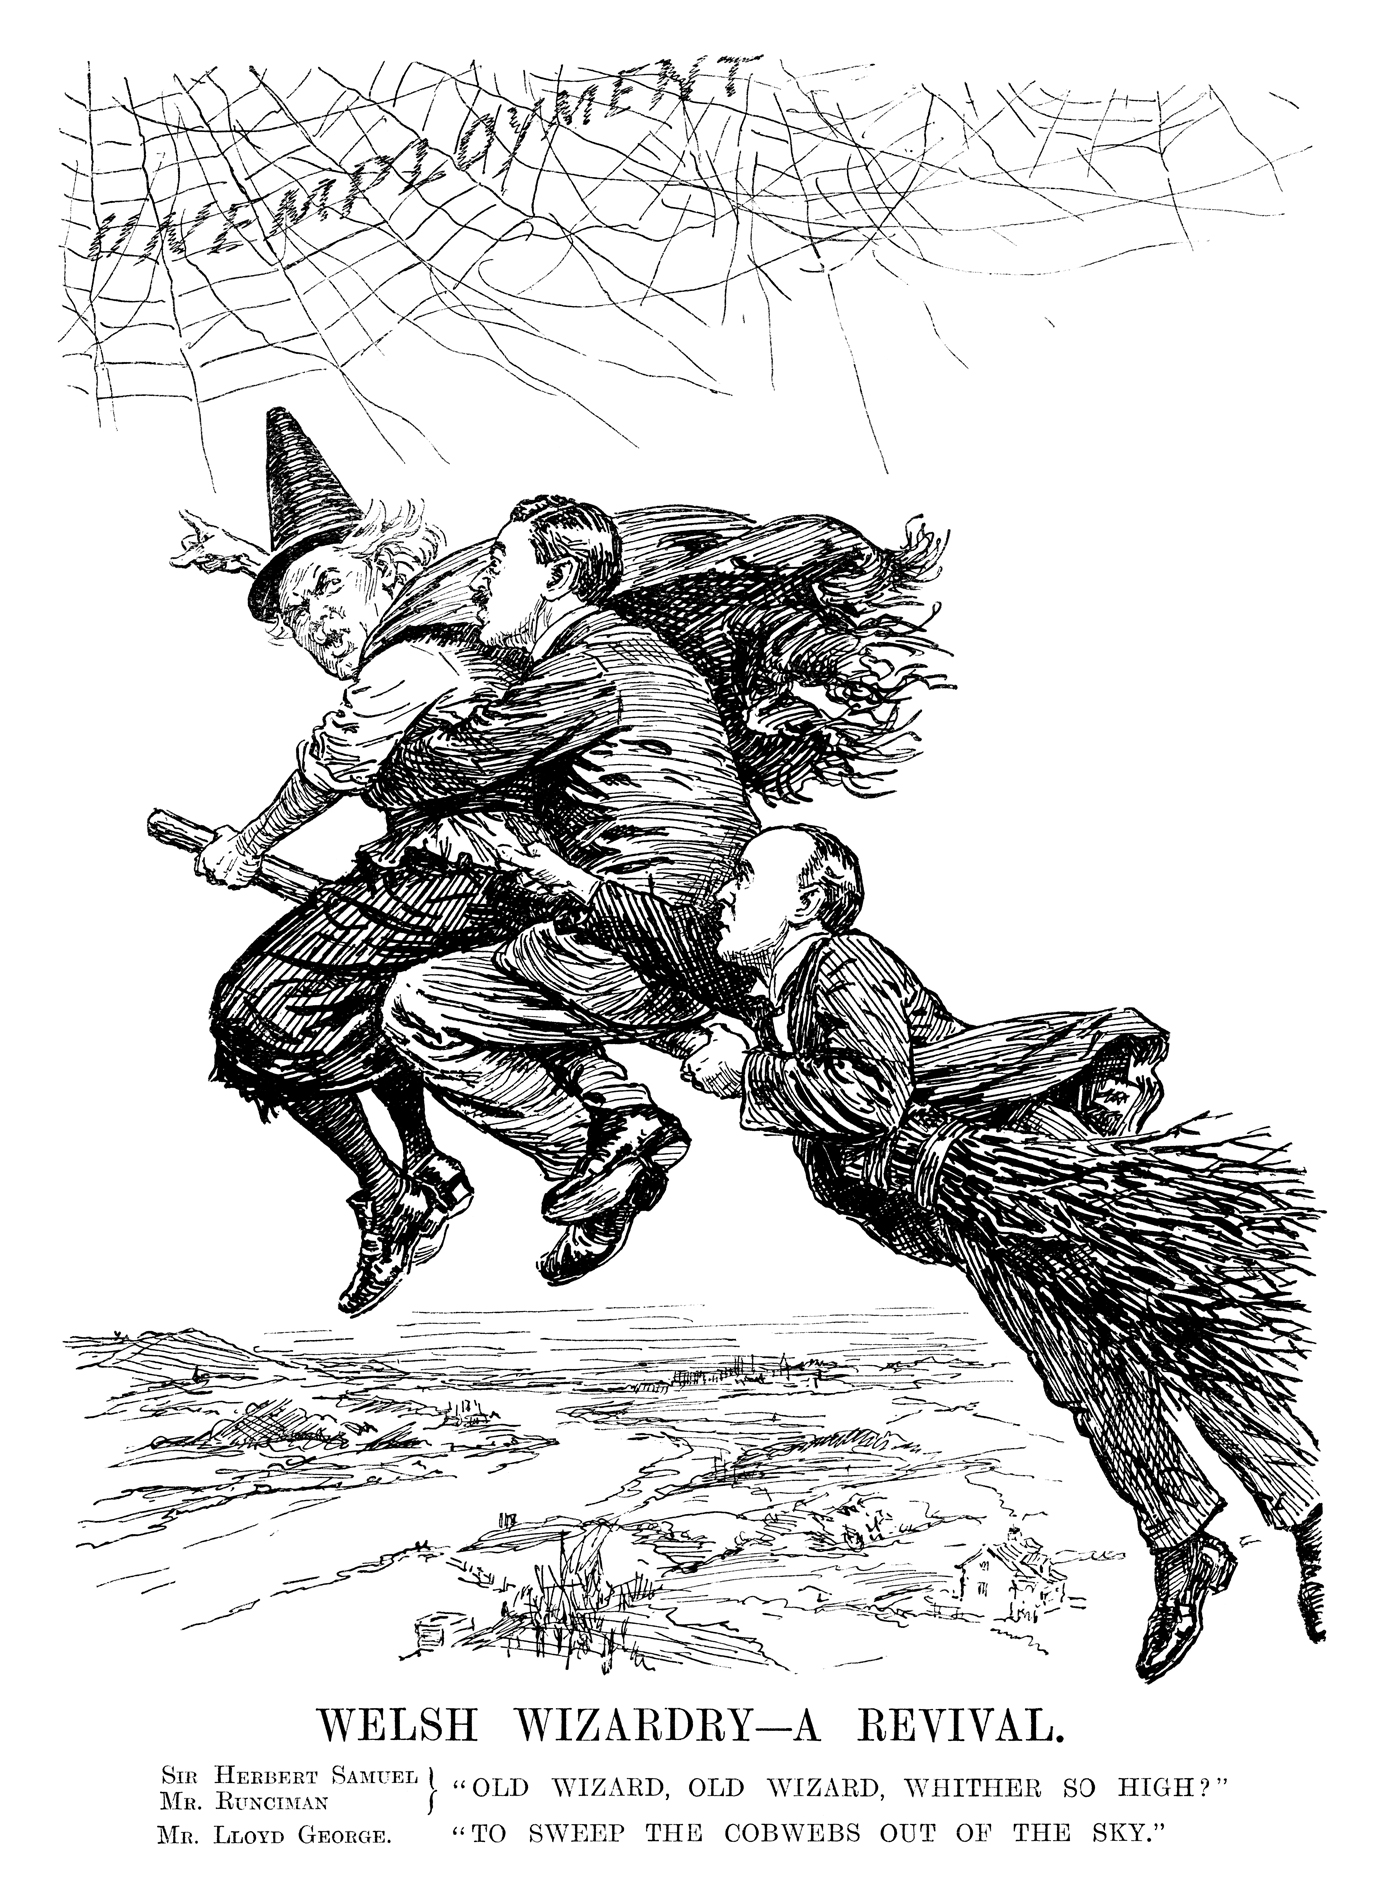 Welsh Wizardry - A Revival. Sir Herbert Samuel, Mr Runciman} "Old wizard, old wizard, whither so high?" Mr Lloyd George. "To sweep the cobwebs out of the sky." © Punch Ltd